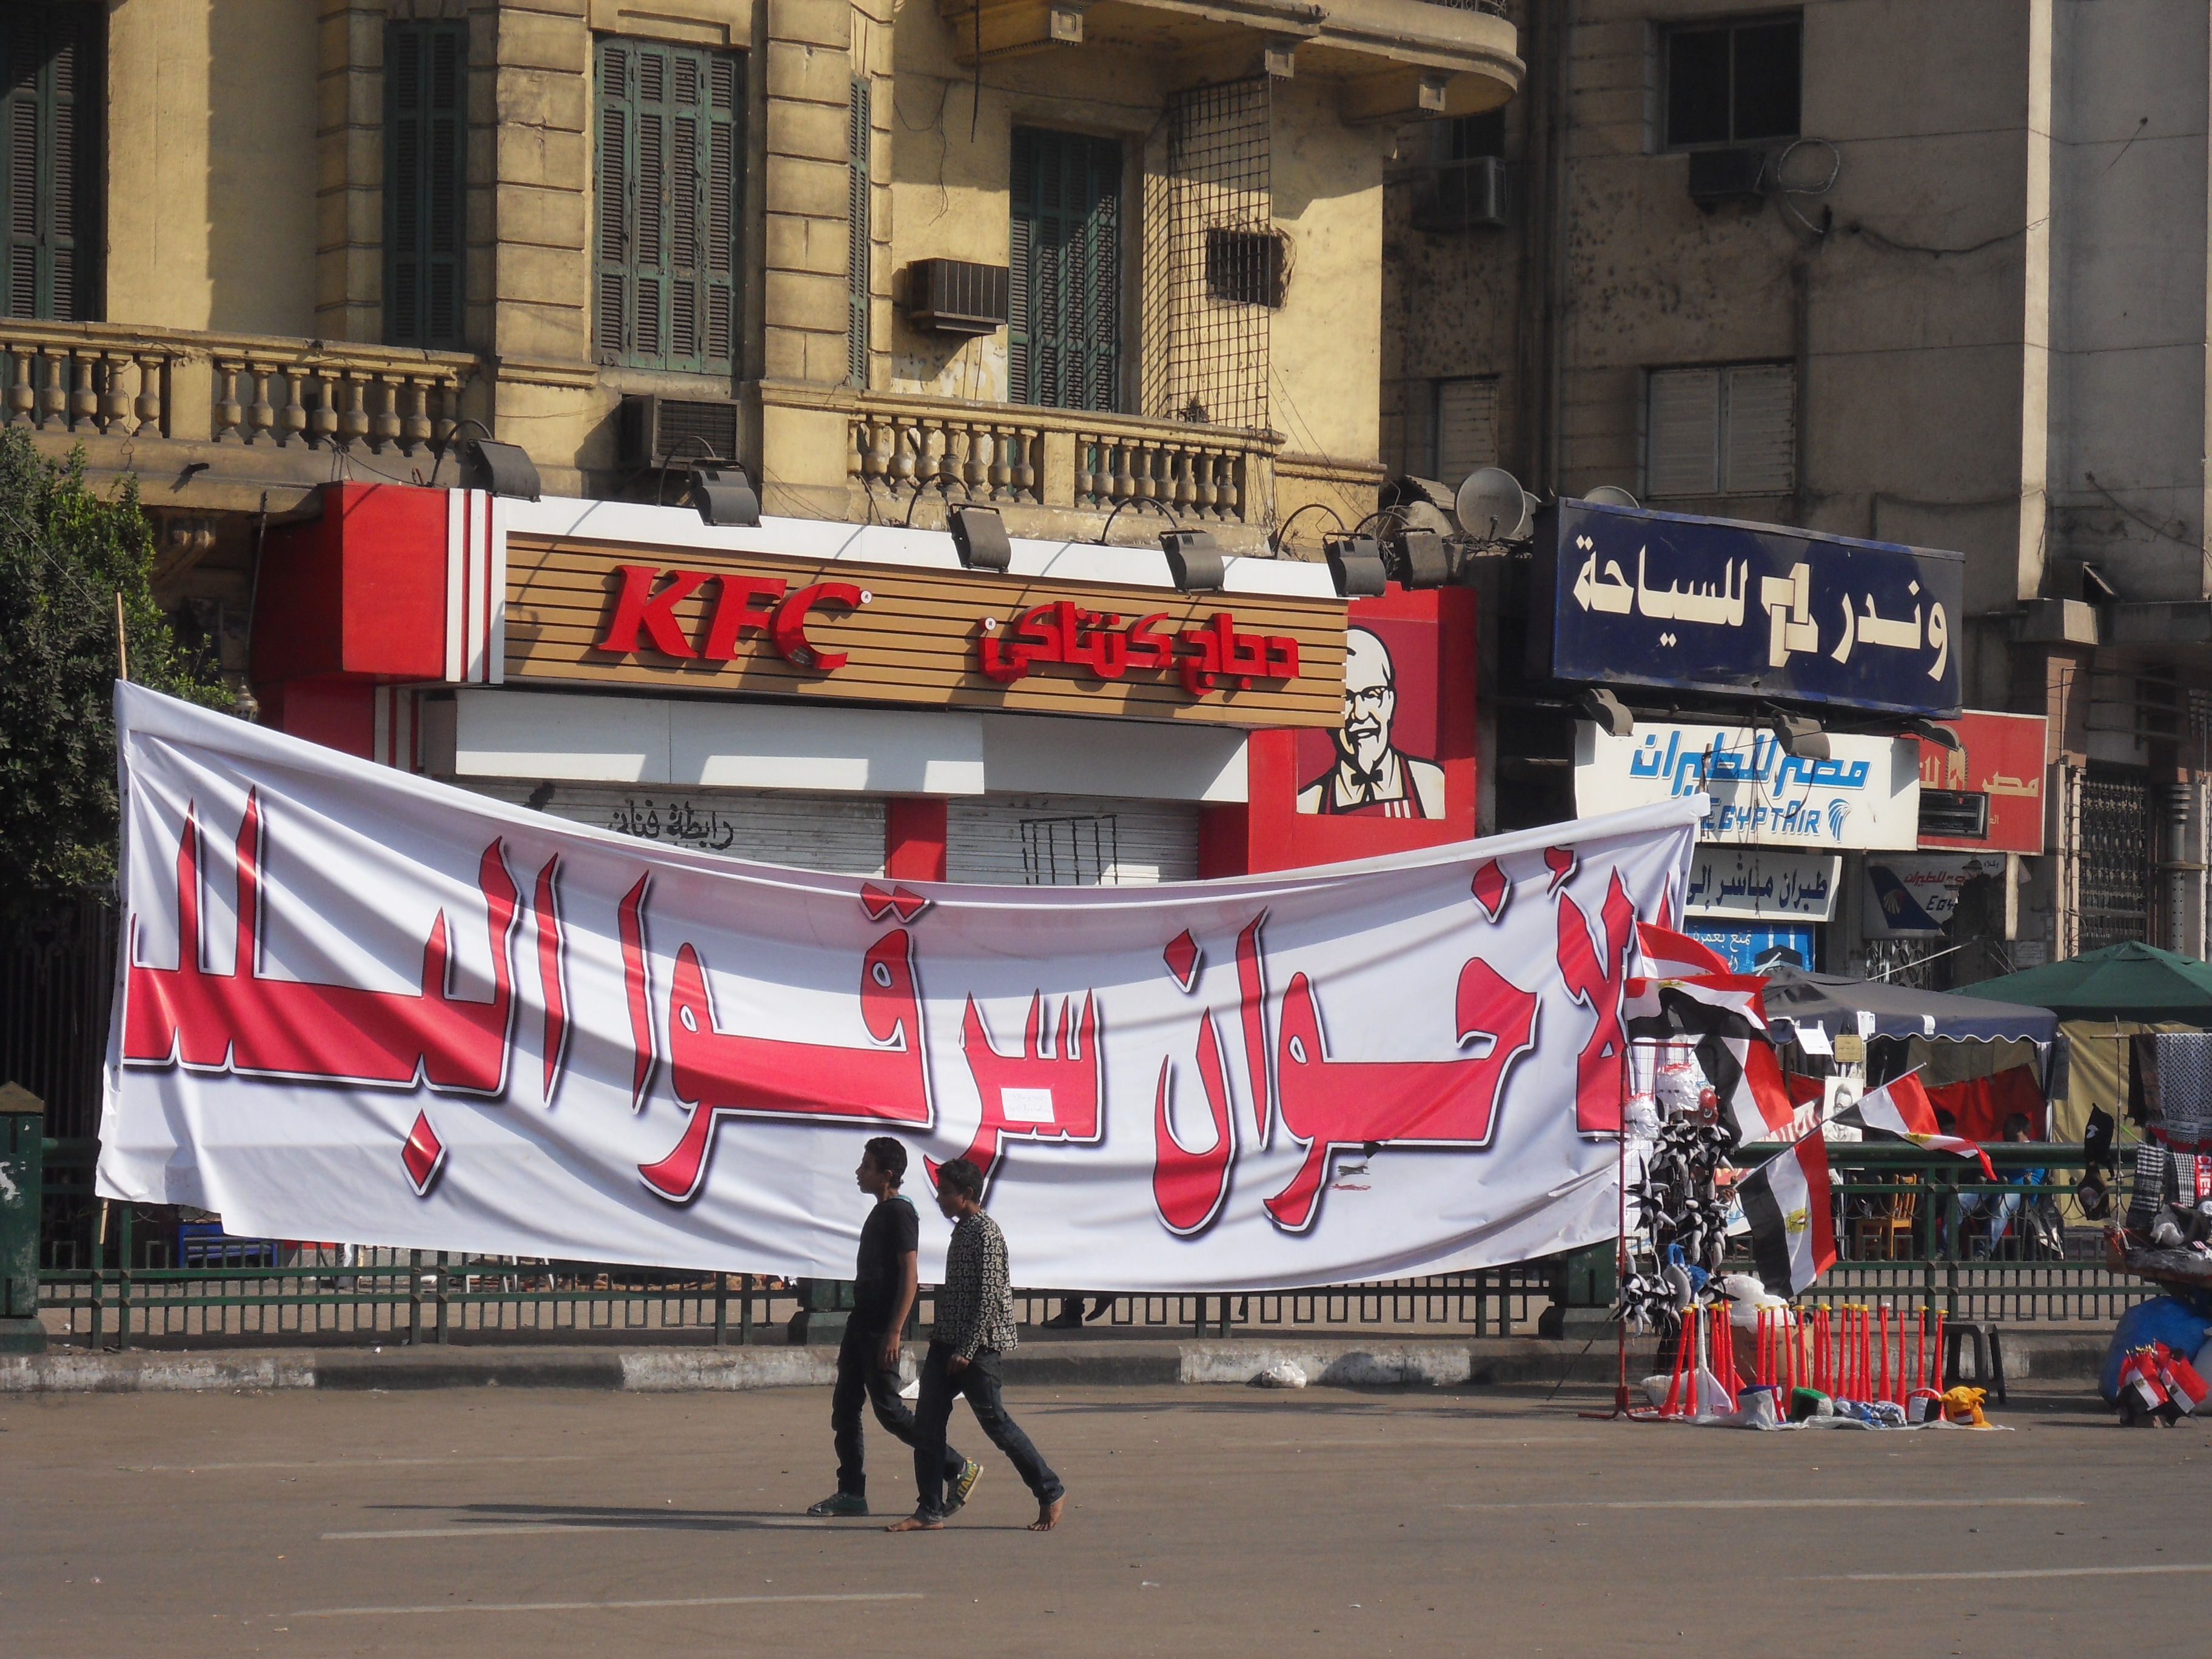 The 'infamous' KFC. During the protests in 2011, it was often reported that the protesters were paid with American dollars and given free KFC meals in order to protest.